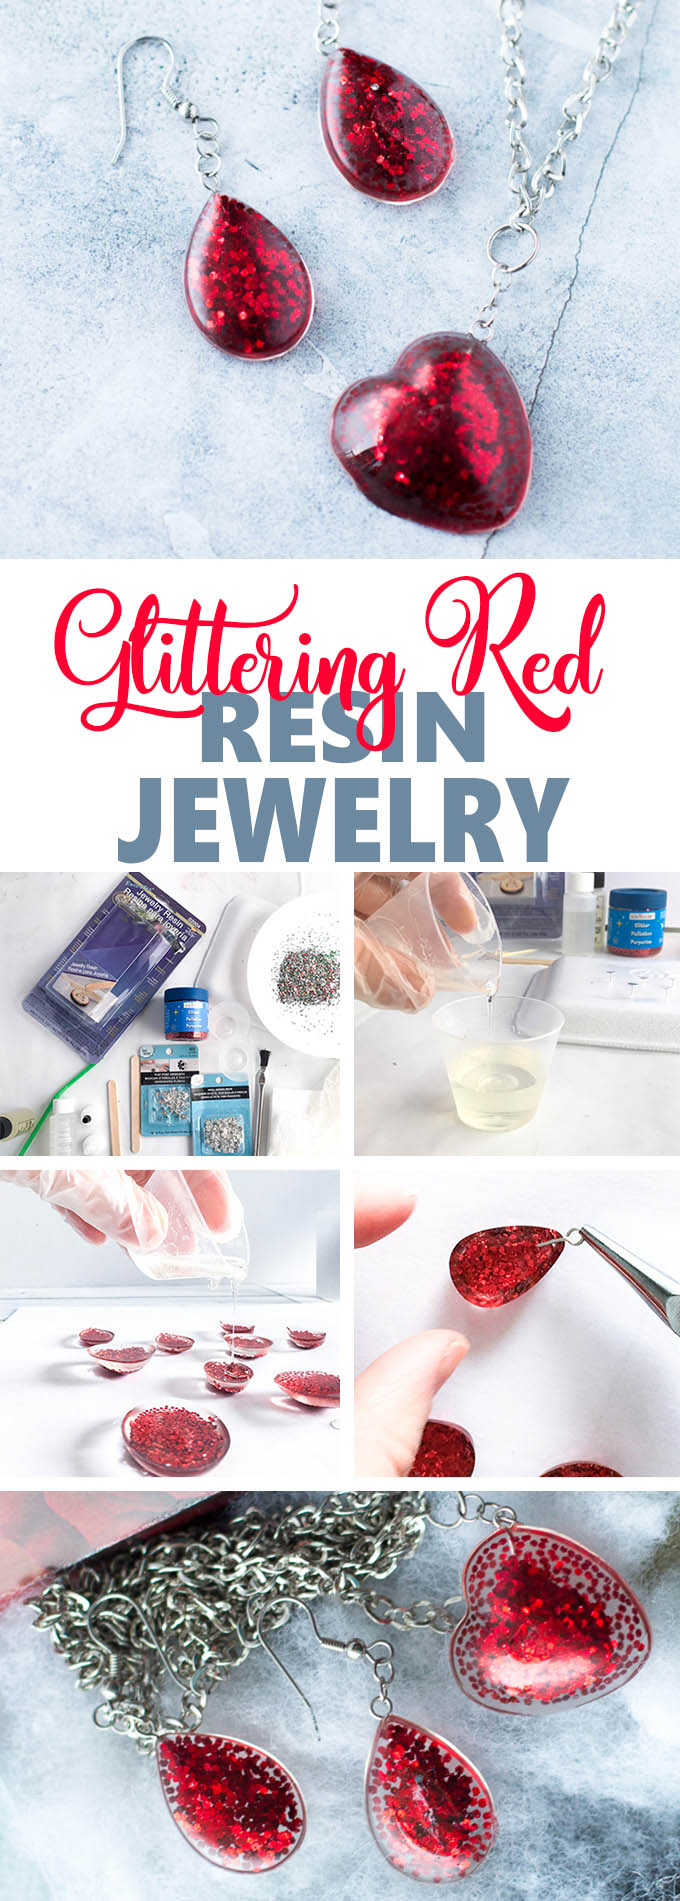 Galentine's Day DIY gift ideas | Valentine's day jewelry idea with resin | How to make resin earrings and pendants #resincrafts #resincraftsblog #diyjewelry via @resincraftsblog